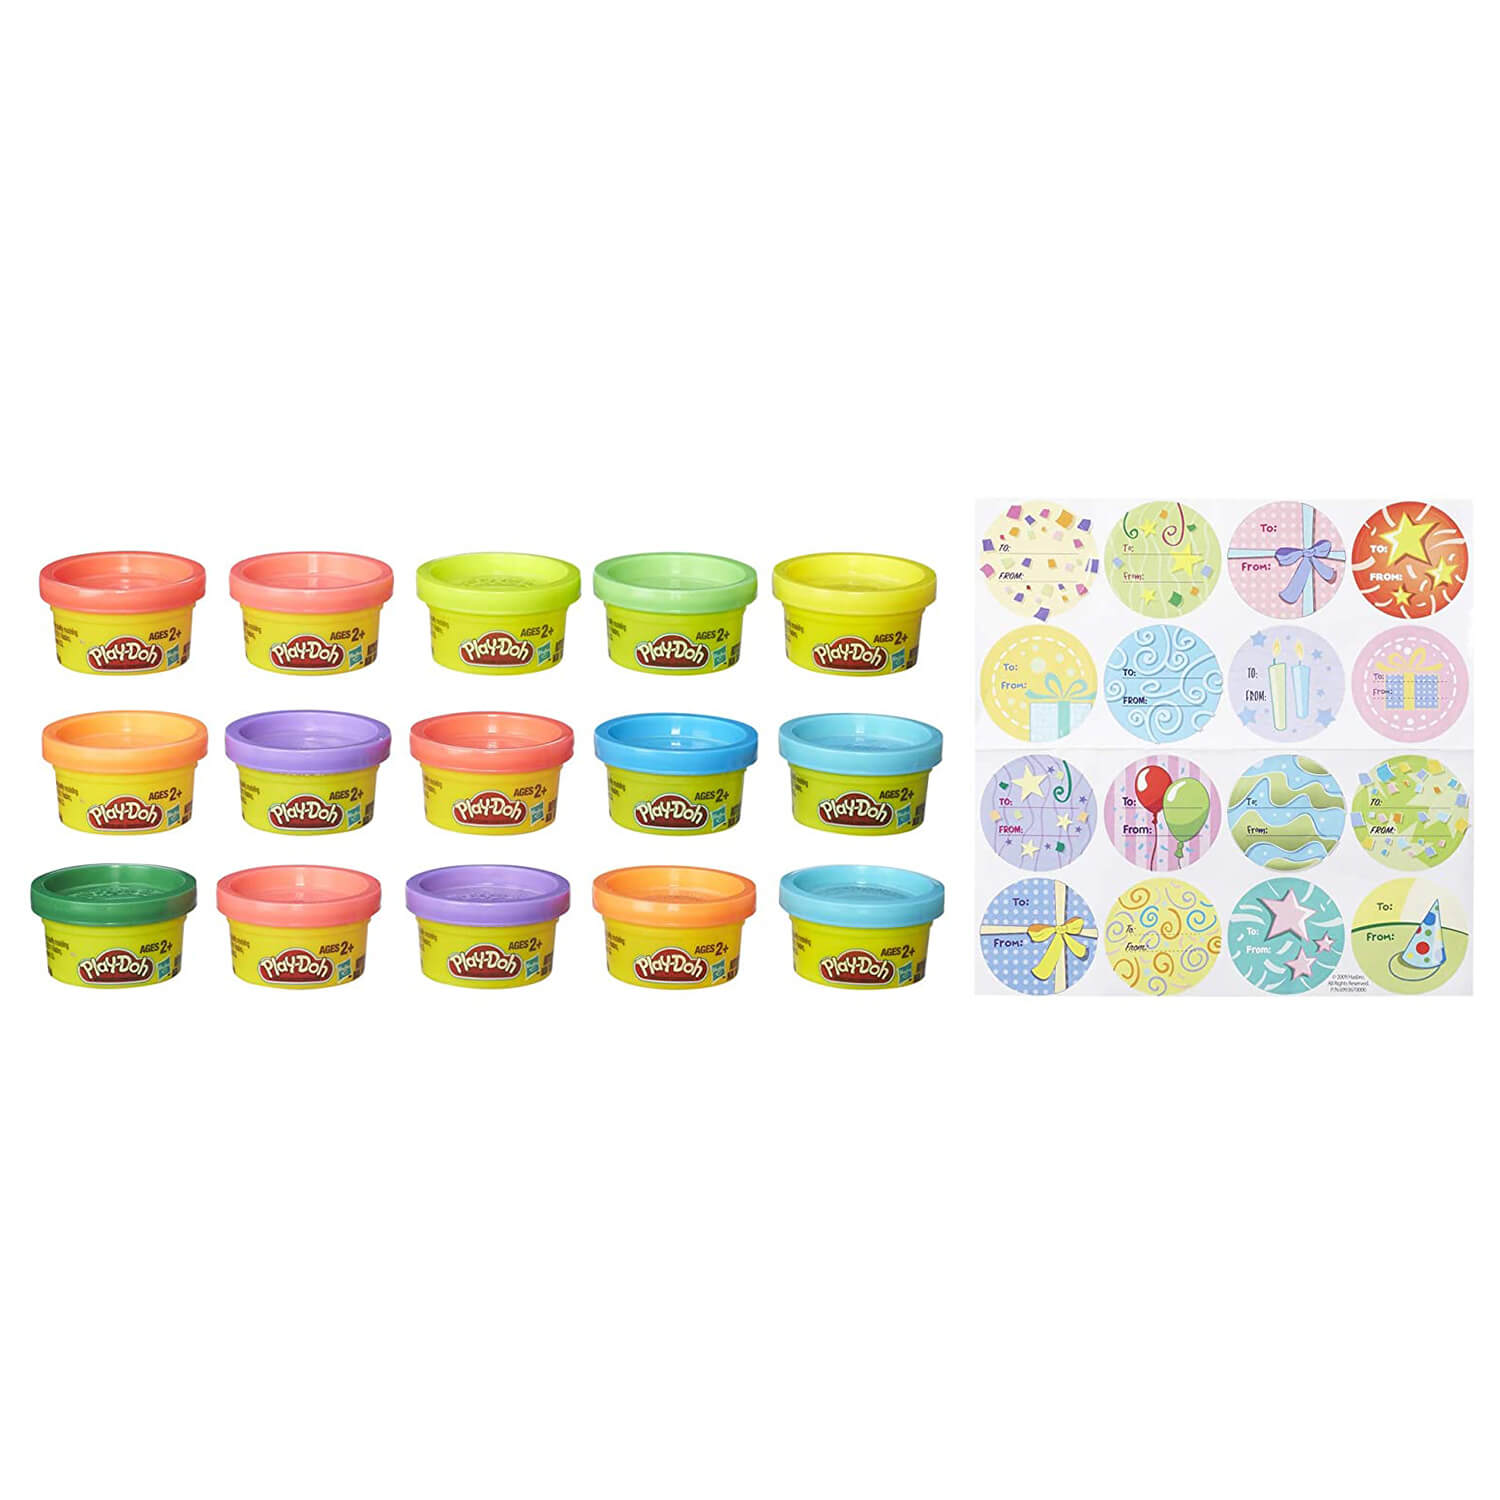 Play-Doh party pack 15 count